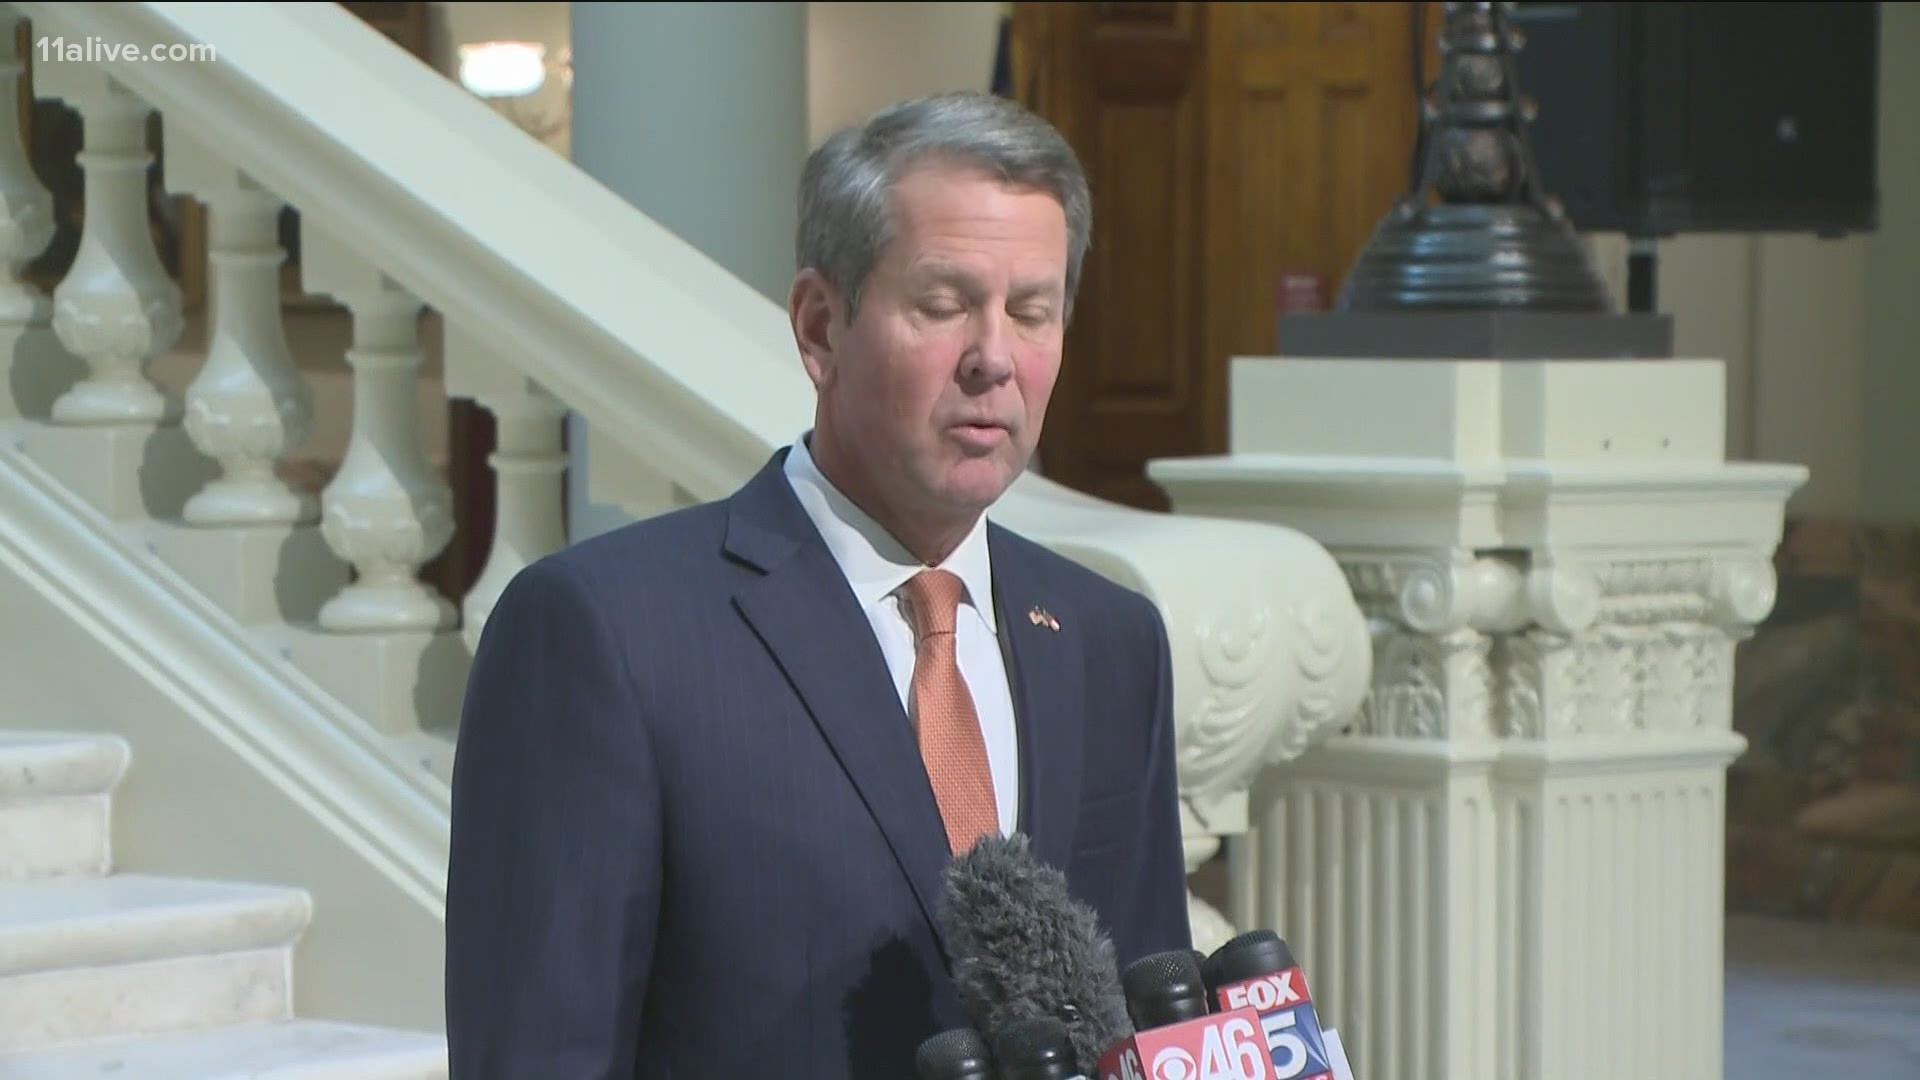 The governor sounded more than a bit agitated when speaking to reporters during a press conference on Wednesday afternoon.